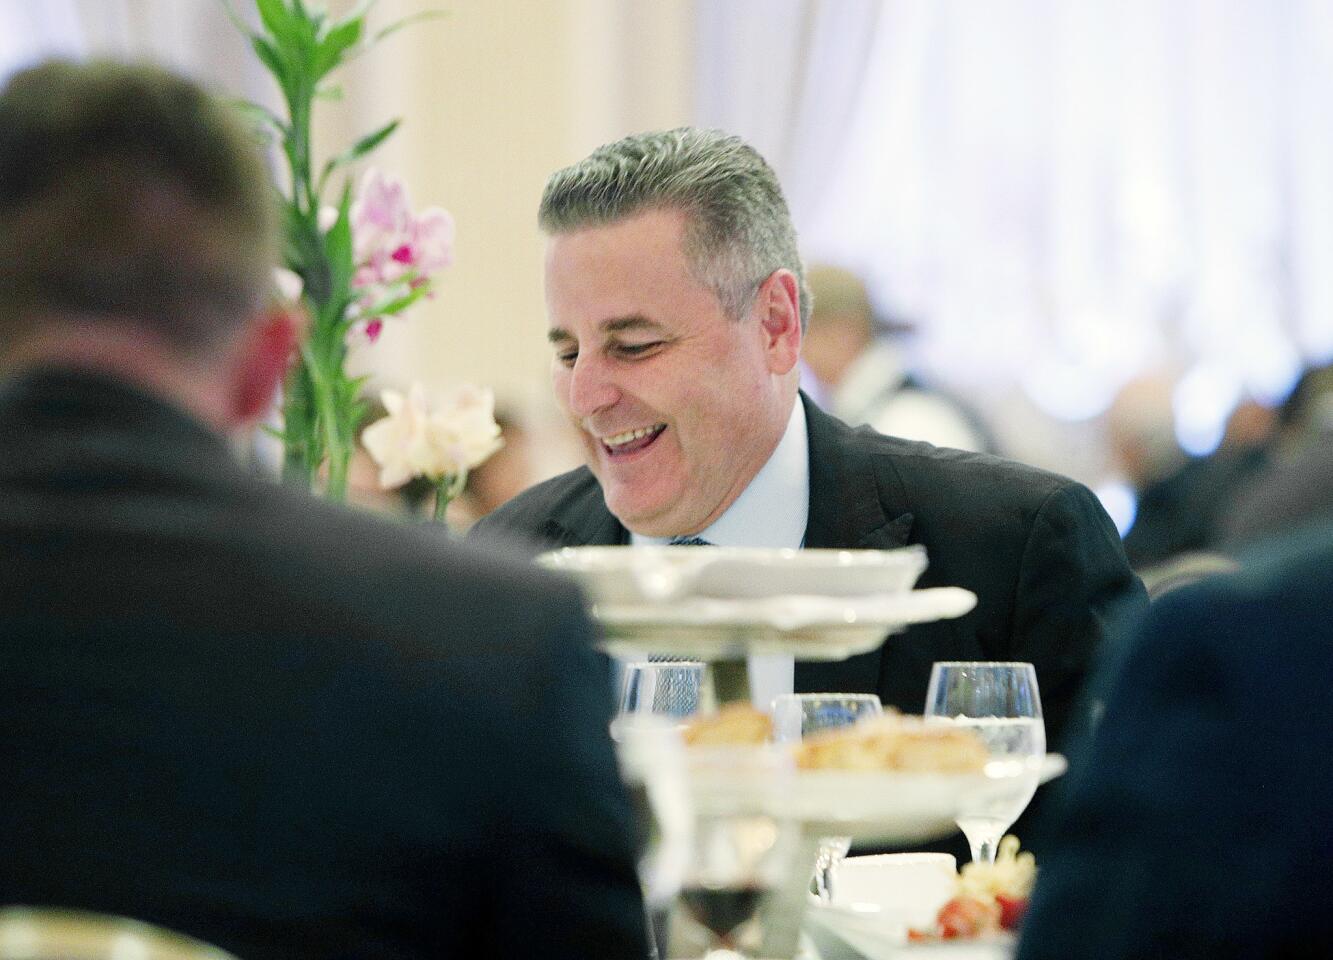 Glendale Fire Chief Greg Fish laughs as he is talked about at his retirement dinner at the Renaissance Banquet hall in Glendale on Wednesday, September 19, 2018. Chief Fish is retiring after 31 years with the department to take a job at the fire department in Carpinteria.